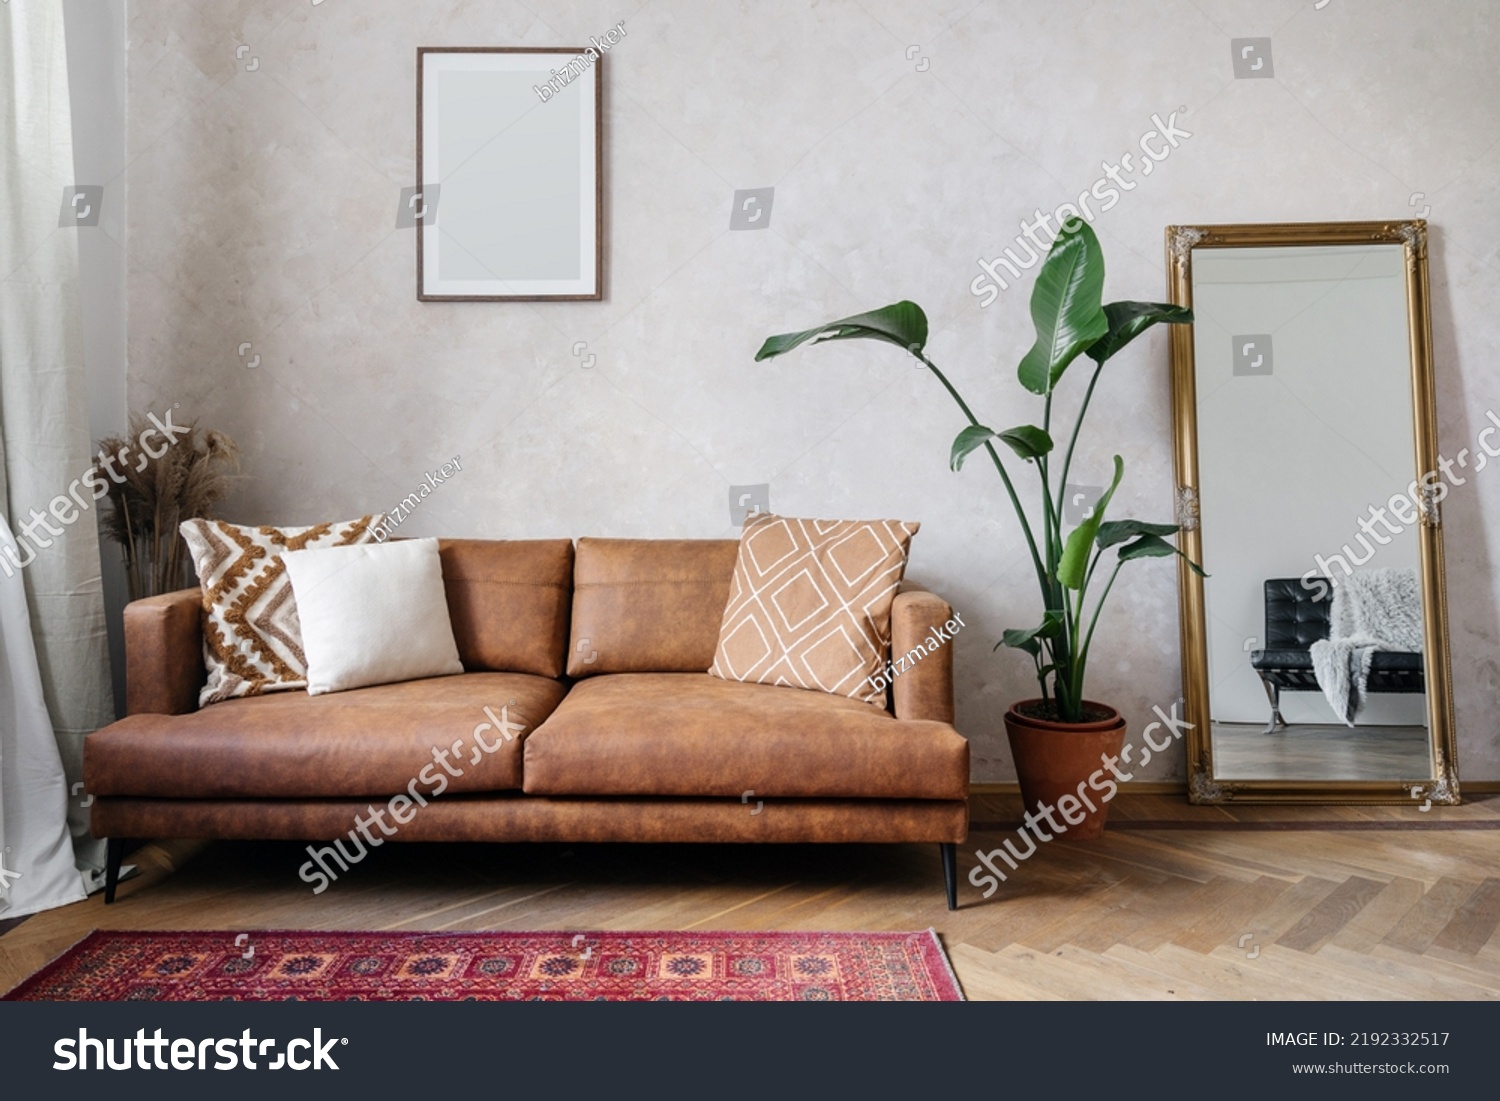 Modern design of living room with brown eco leather couch, soft cushions, mirror with golden frame, copy space picture frame on wall and houseplant in pot #2192332517